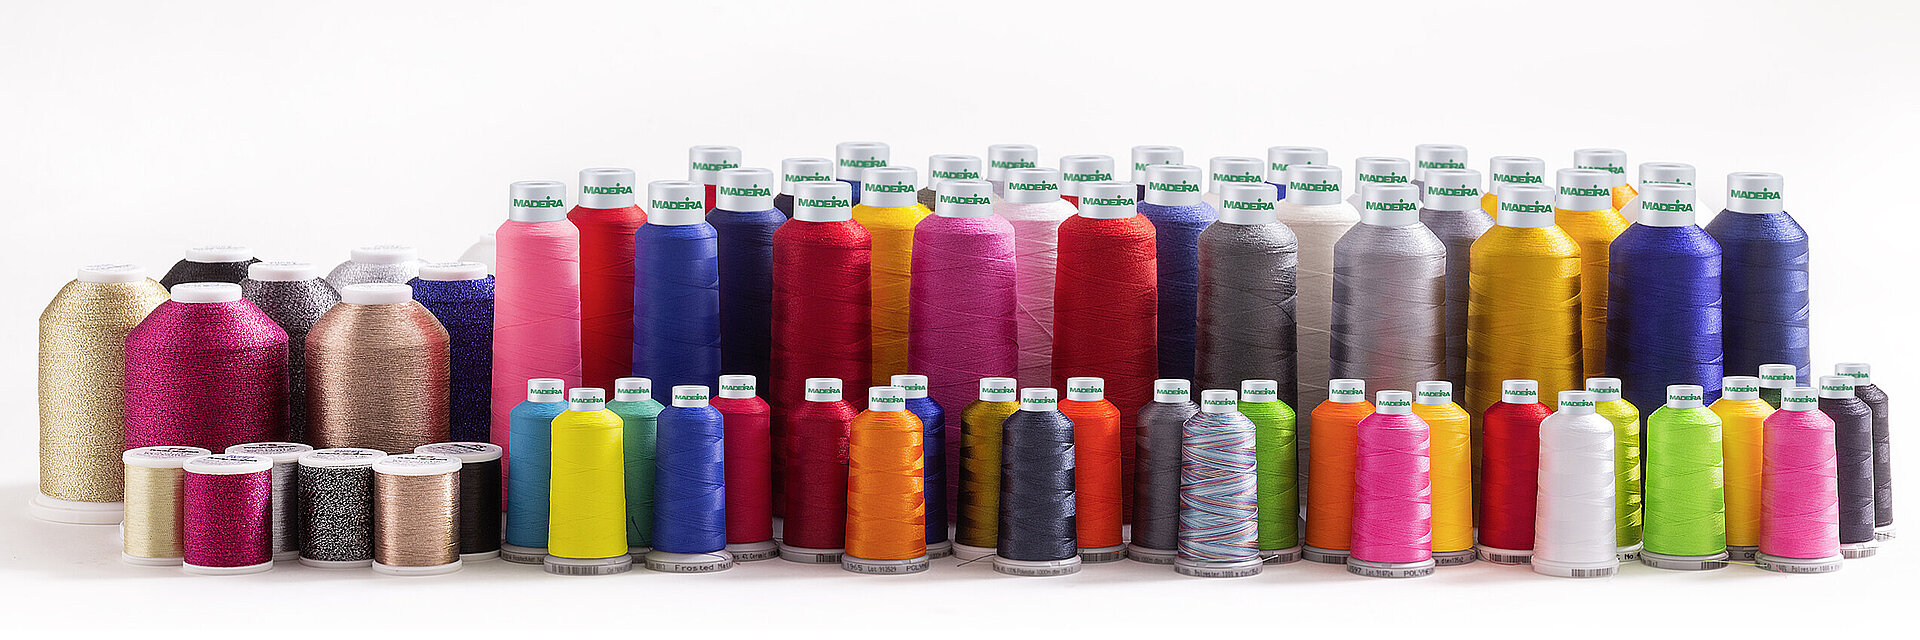 Industrial embroidery threads